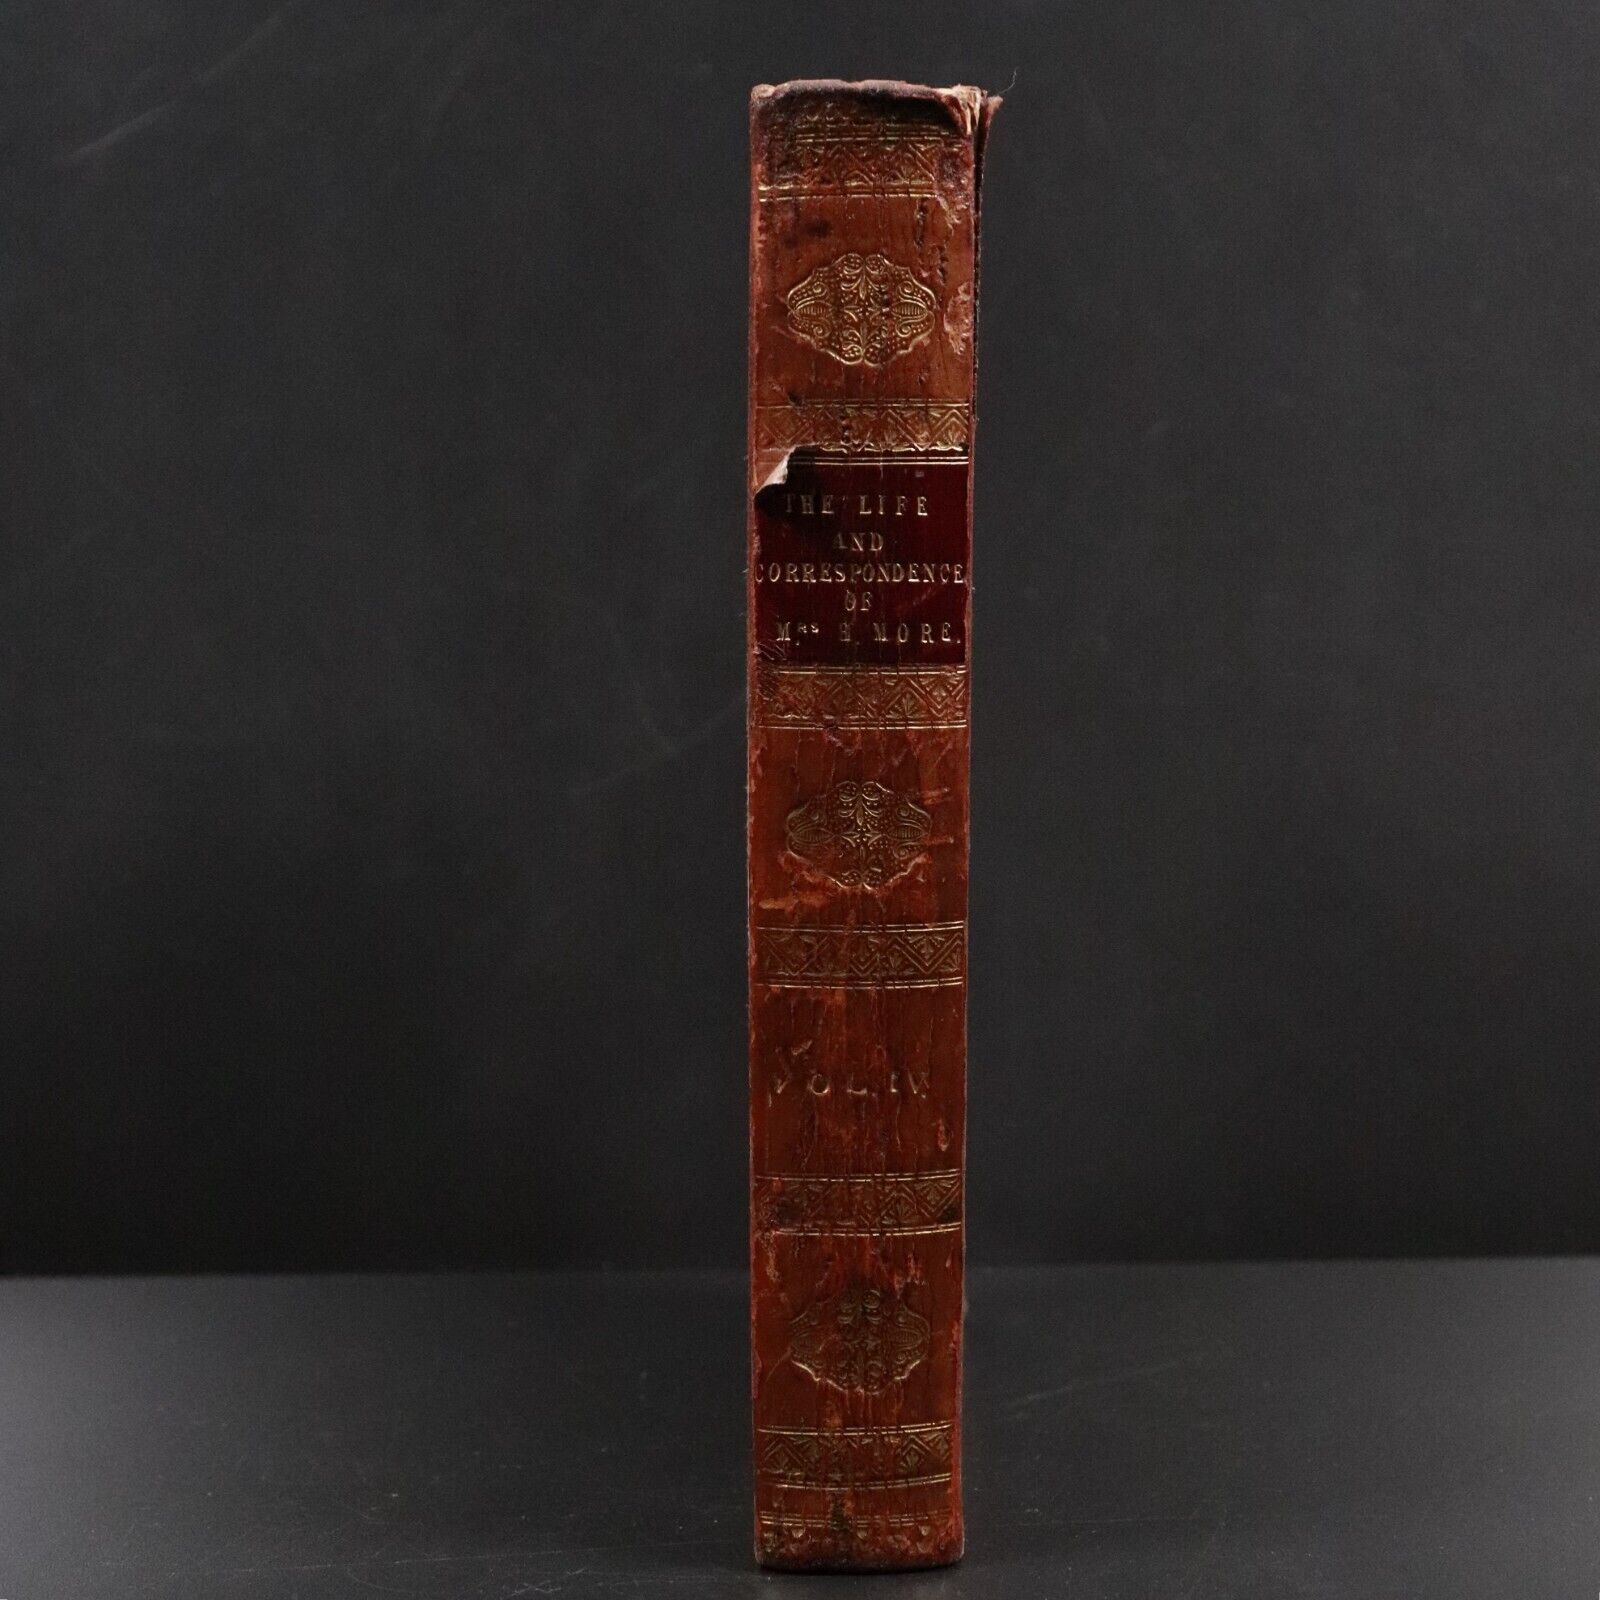 1835 Memoirs Of Mrs Hannah More by W. Roberts Antiquarian British History Book